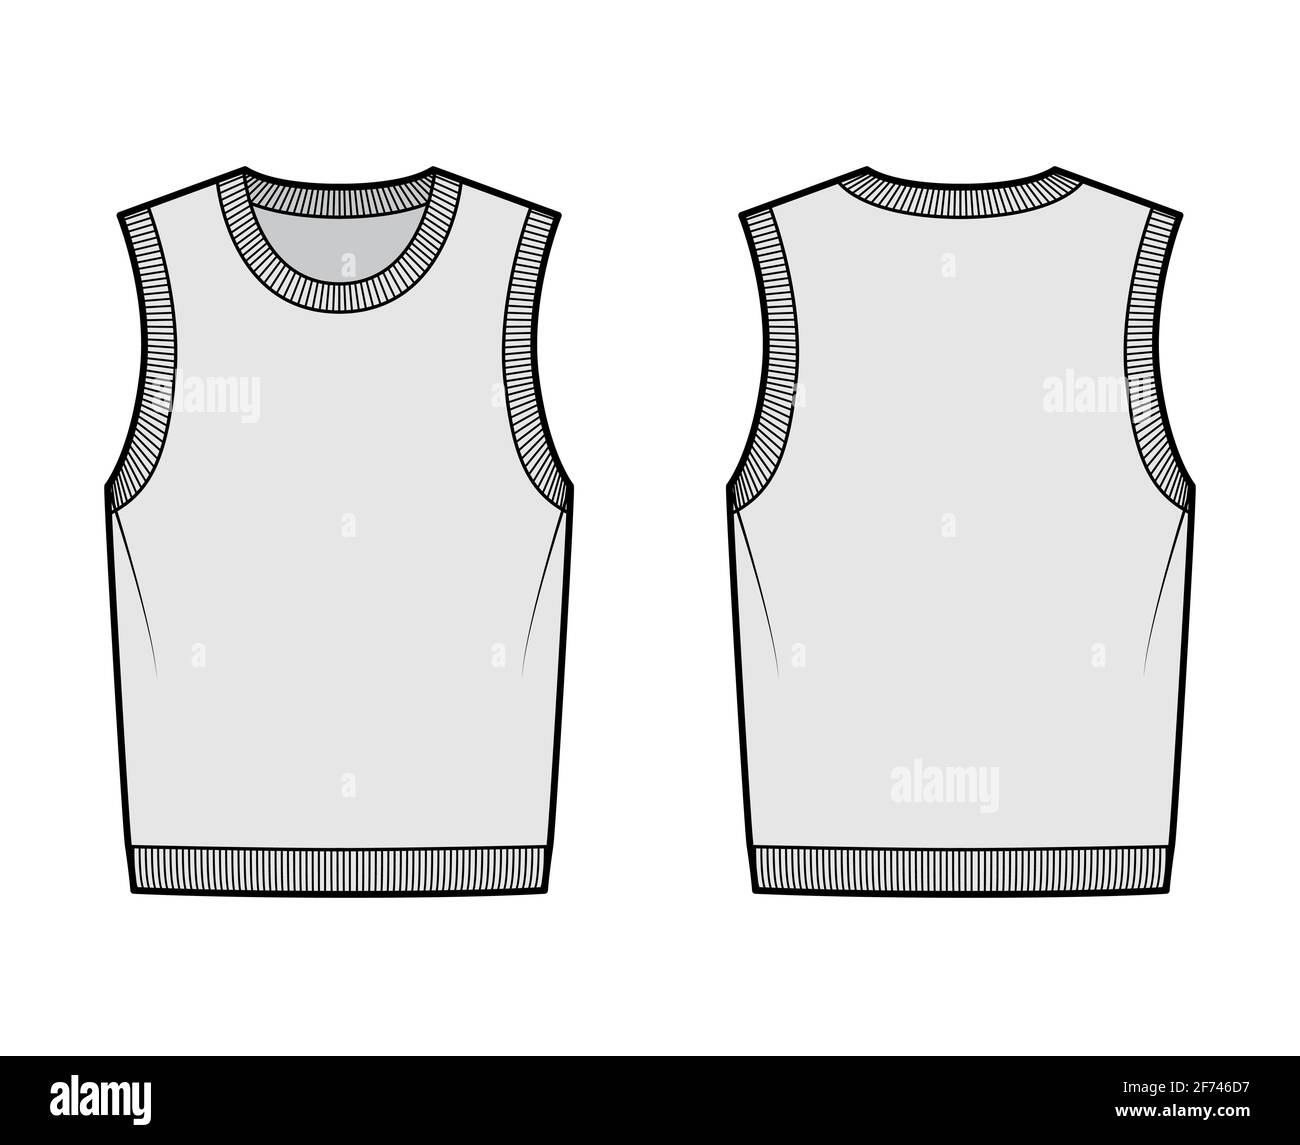 Pullover vest sweater waistcoat technical fashion illustration with sleeveless, rib knit round neckline, oversized body. Flat template front, back, grey color style. Women, men, unisex top CAD mockup Stock Vector